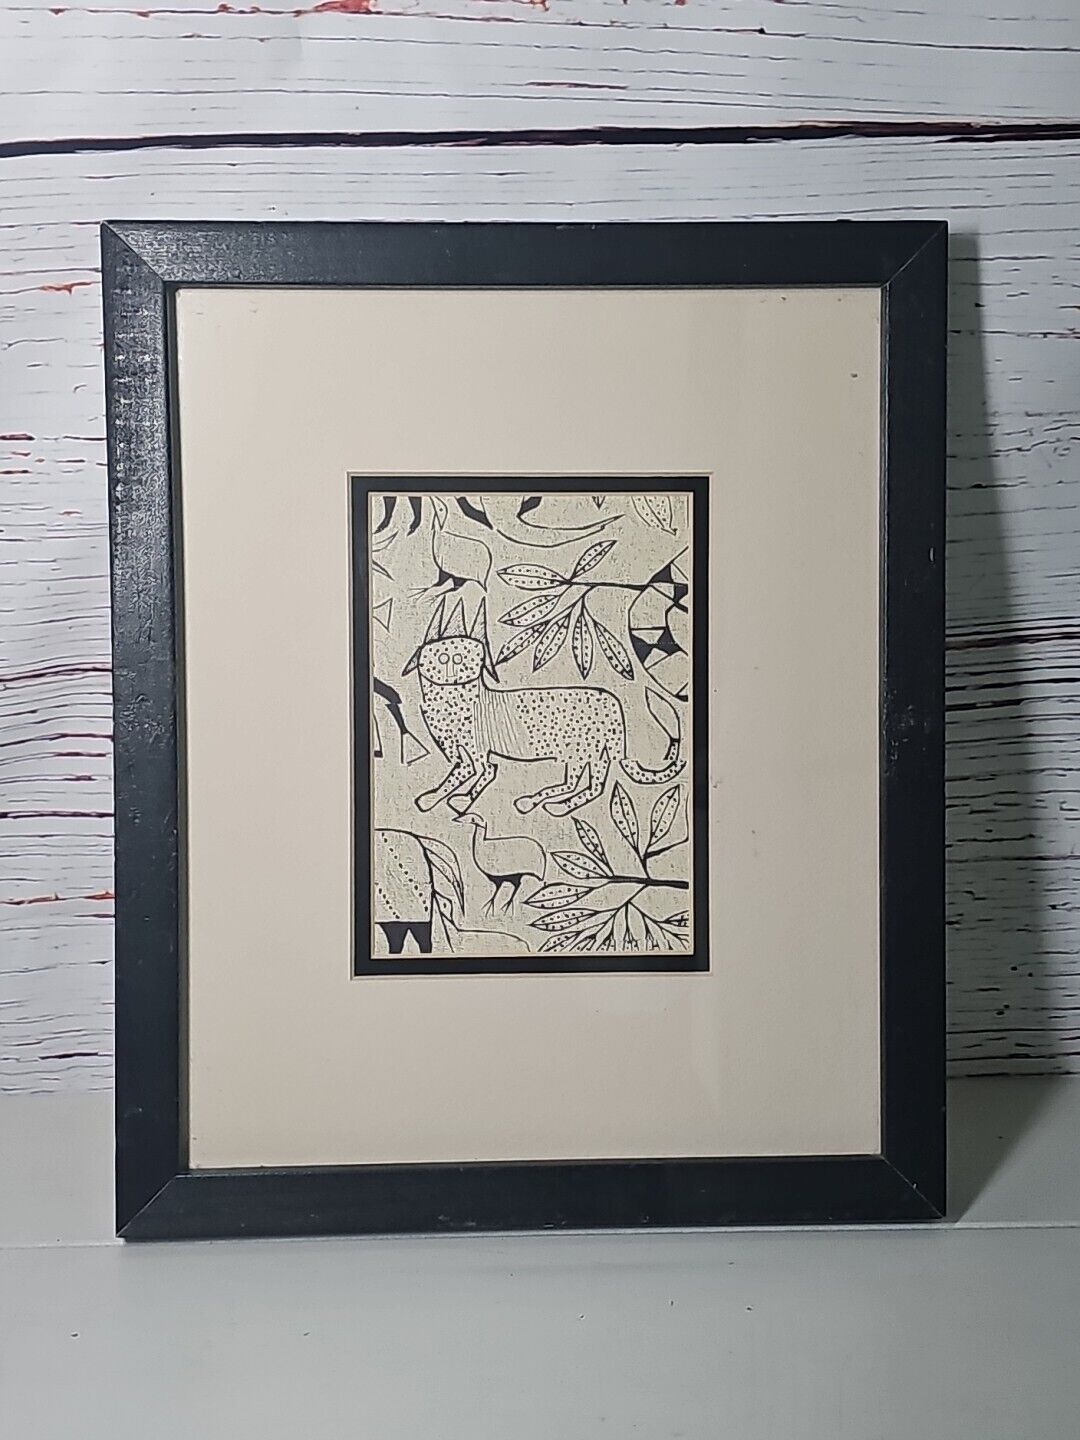 African Art From The Ivory Coast Frame Etchings Vintage Rare Estate Find